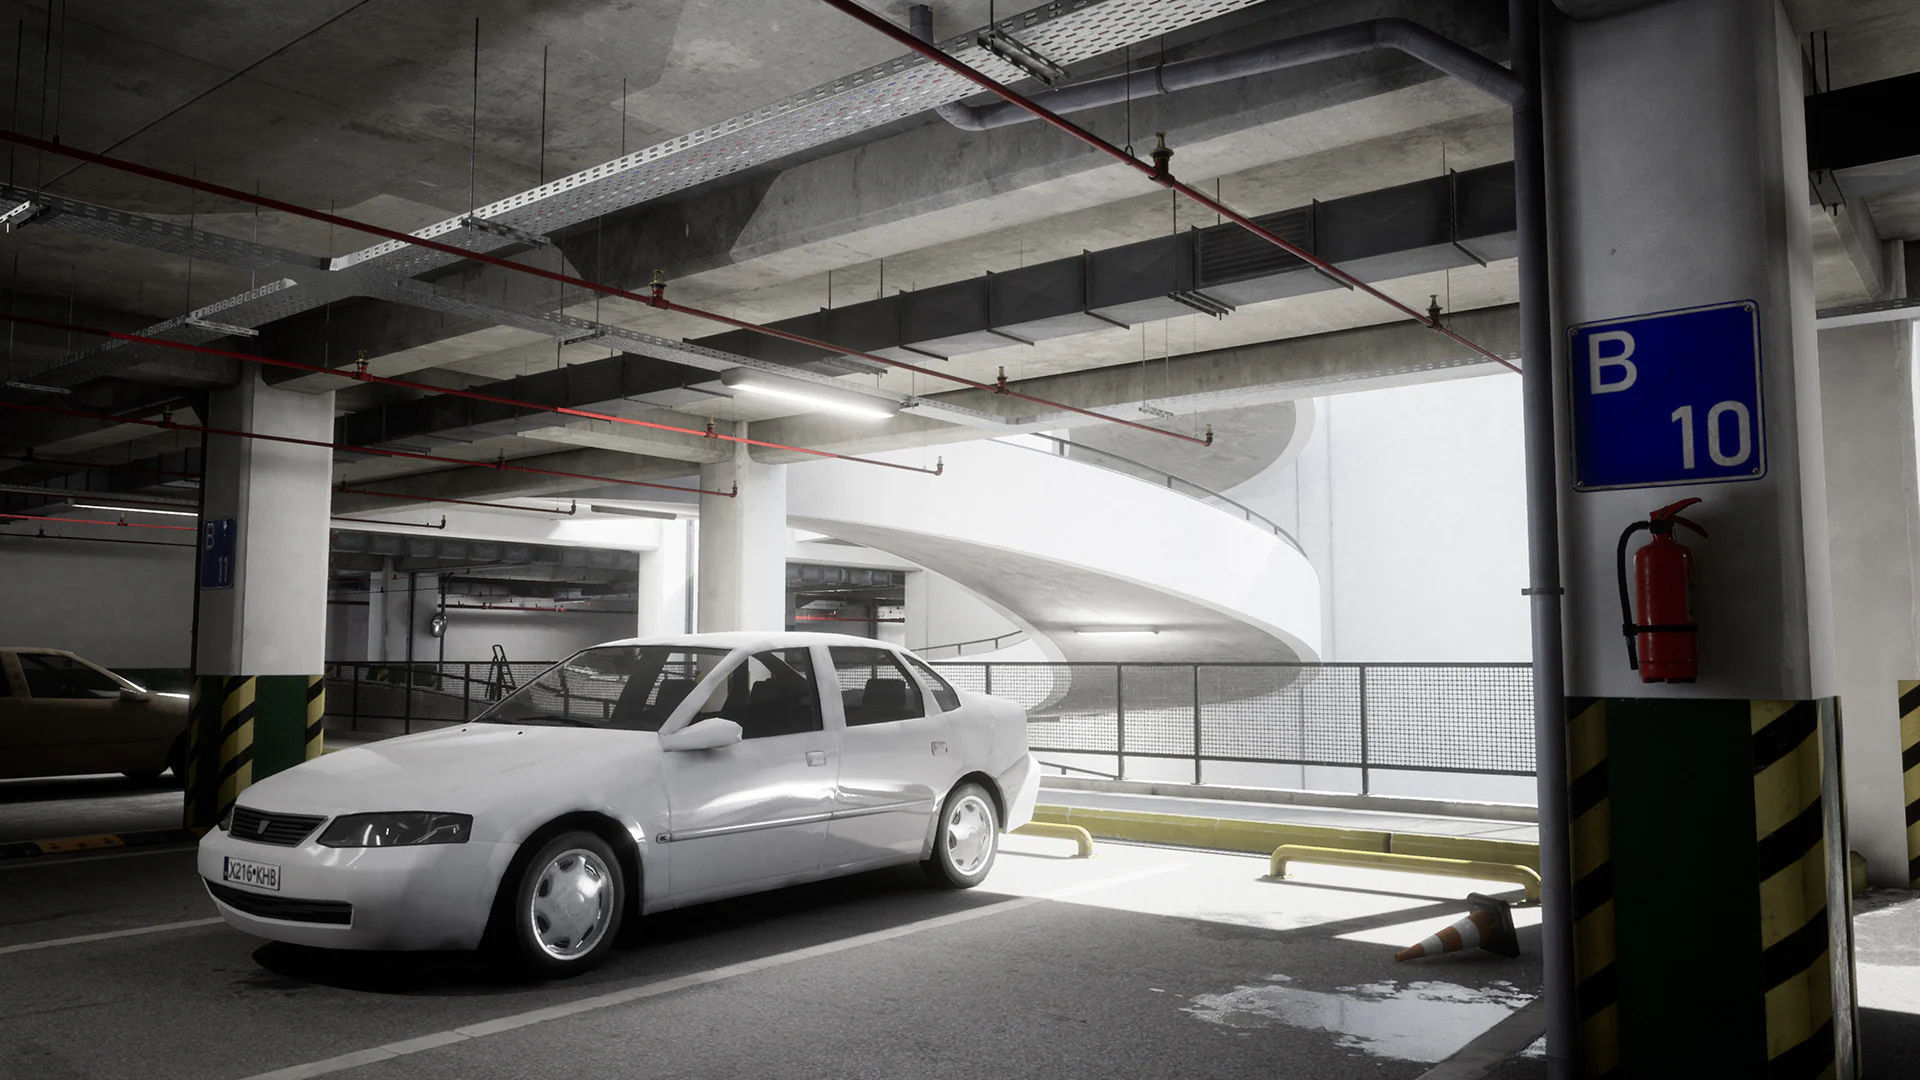 Parking Garage in Environments 4.26+ - UE Marketplace